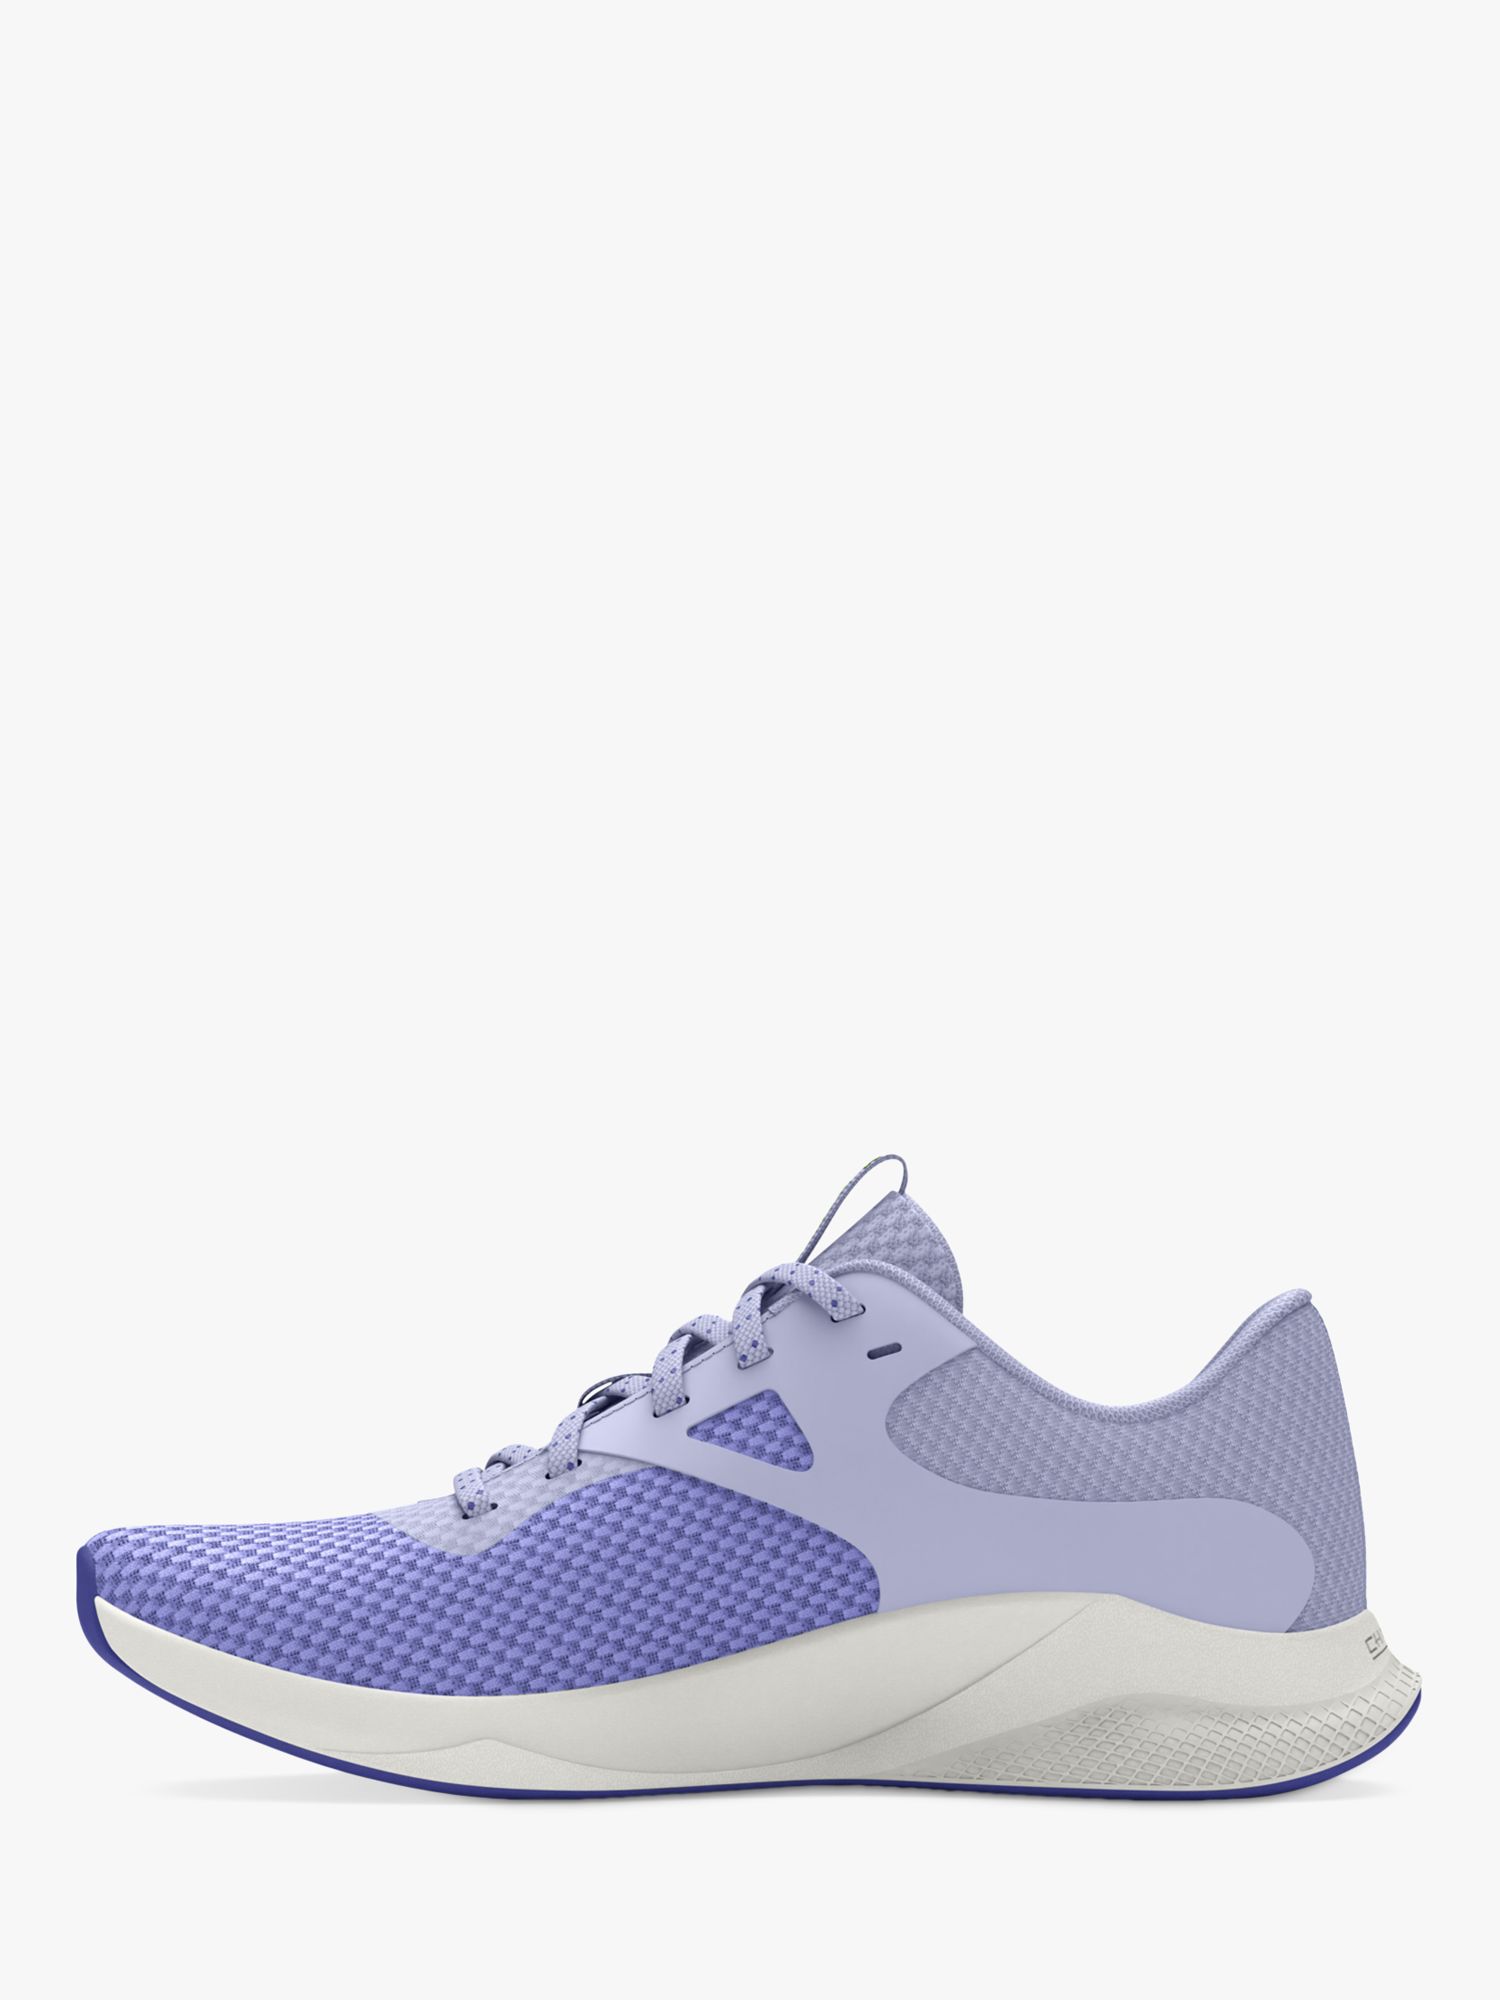 Under Armour Women's Charged Aurora 2 Trainers at John Lewis & Partners